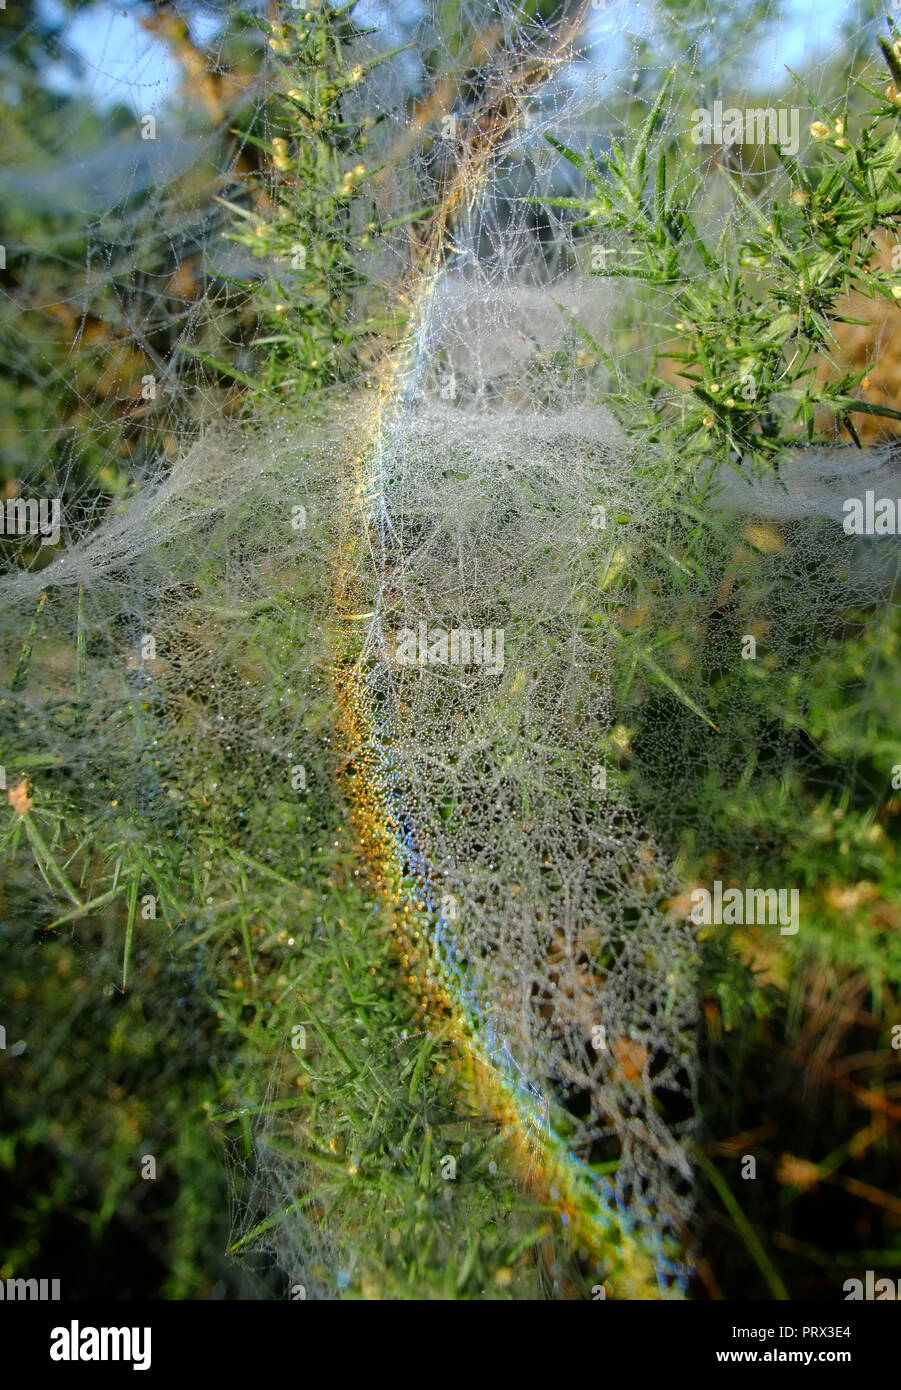 Chailey Common nature reserve, East Sussex. UK. 5th October 2018. Blankets of cobwebs cover gorse bushes in Chailey Common, UK. The webs are created by vast colonies of tiny gorse spider mites . ©Peter Cripps/Alamy Live News Stock Photo